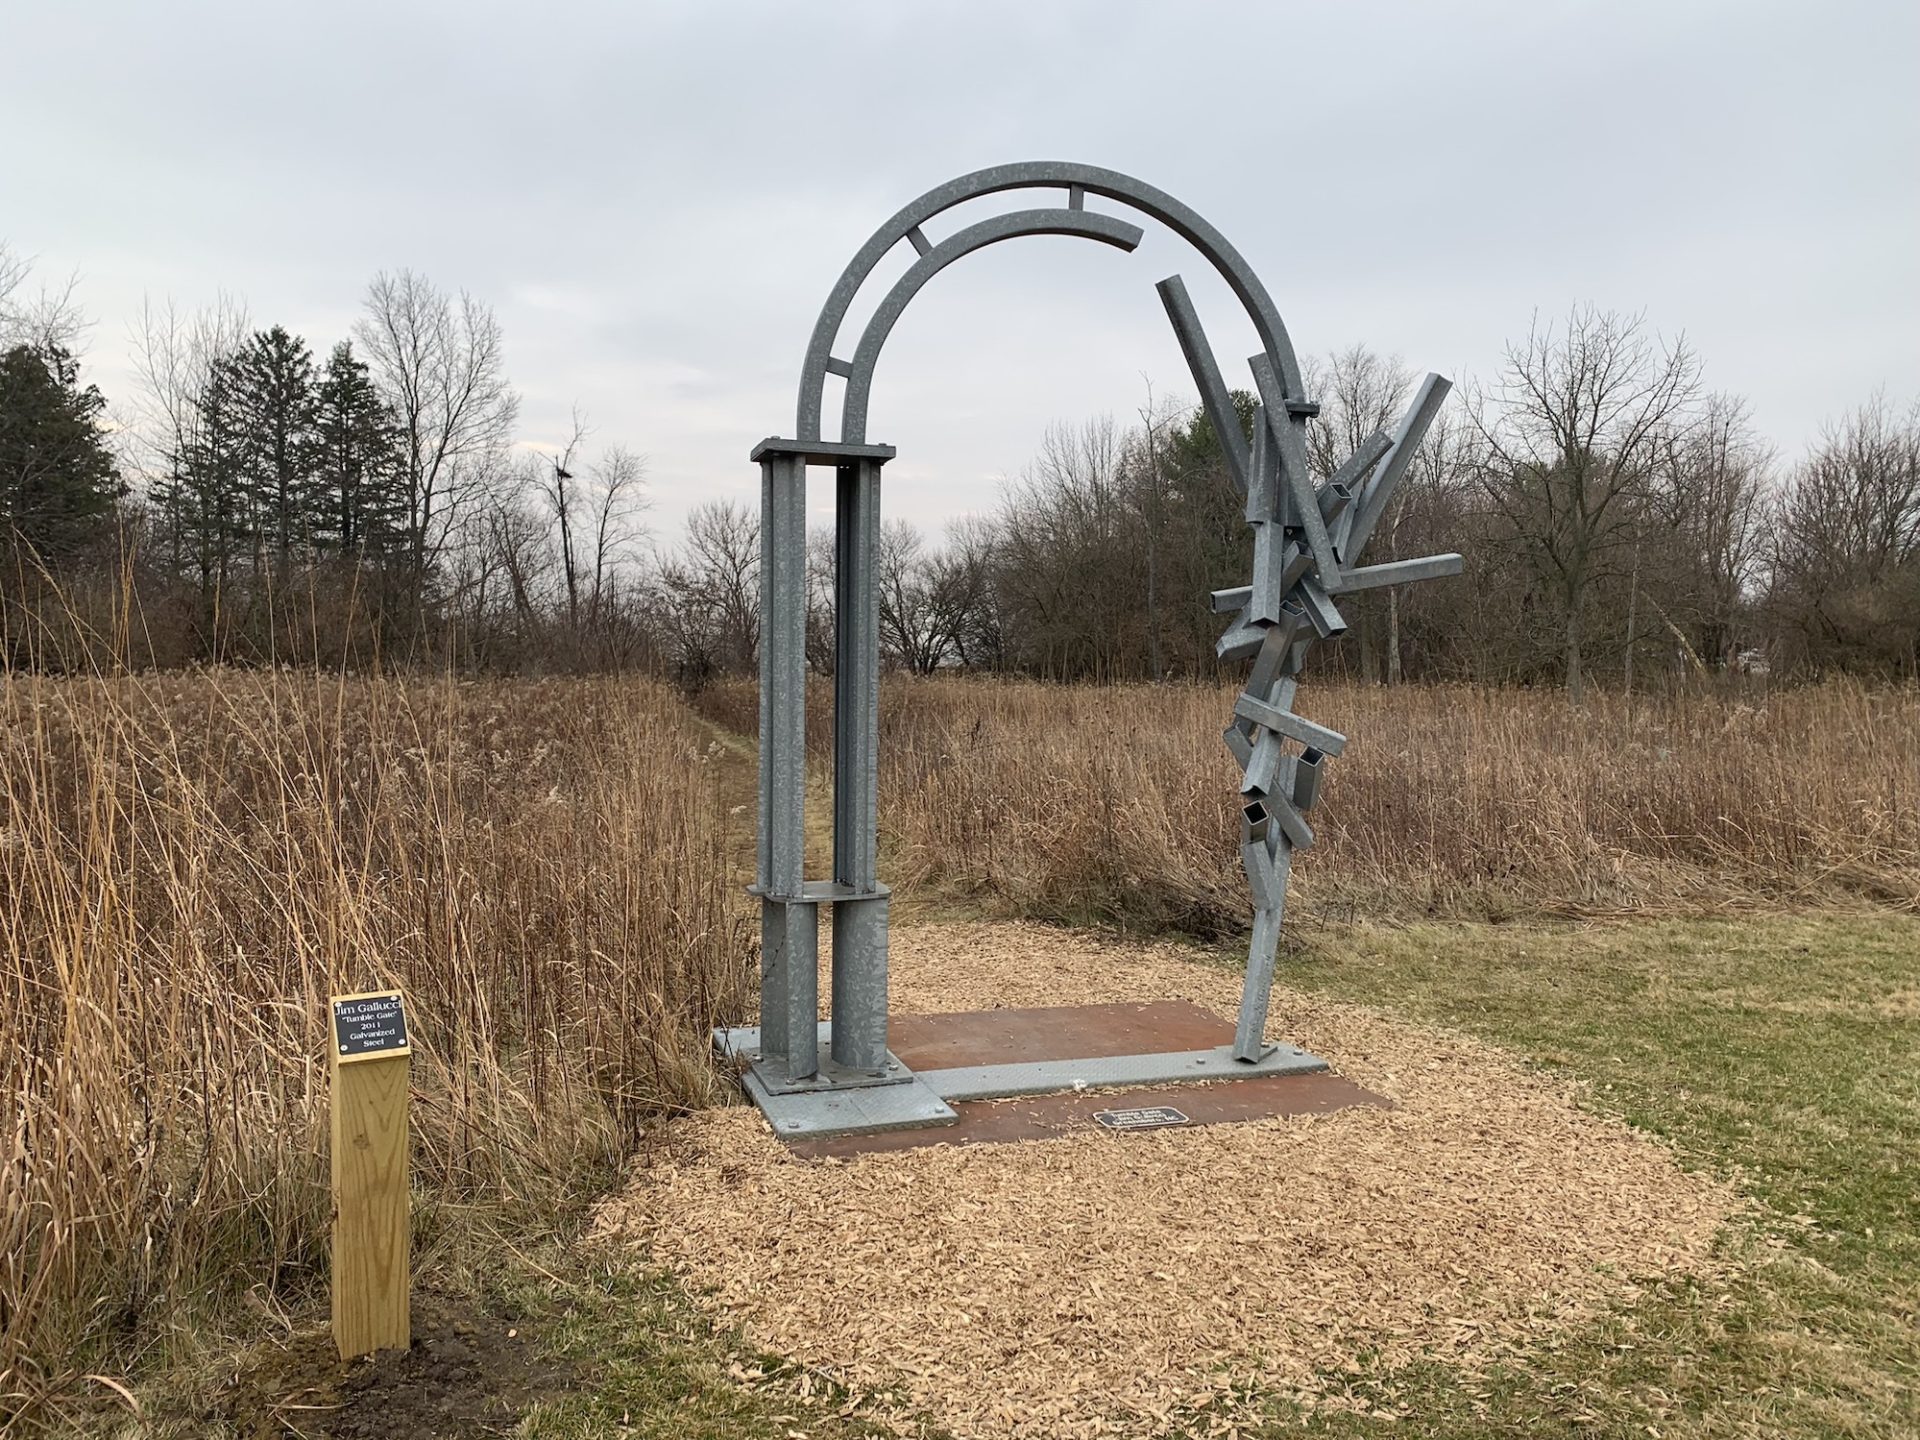 A large metal arched sculpture stands in a park. The left side of the arch has straight columns, while the right side has beams assembled going in every direction creating a 3-D effect.